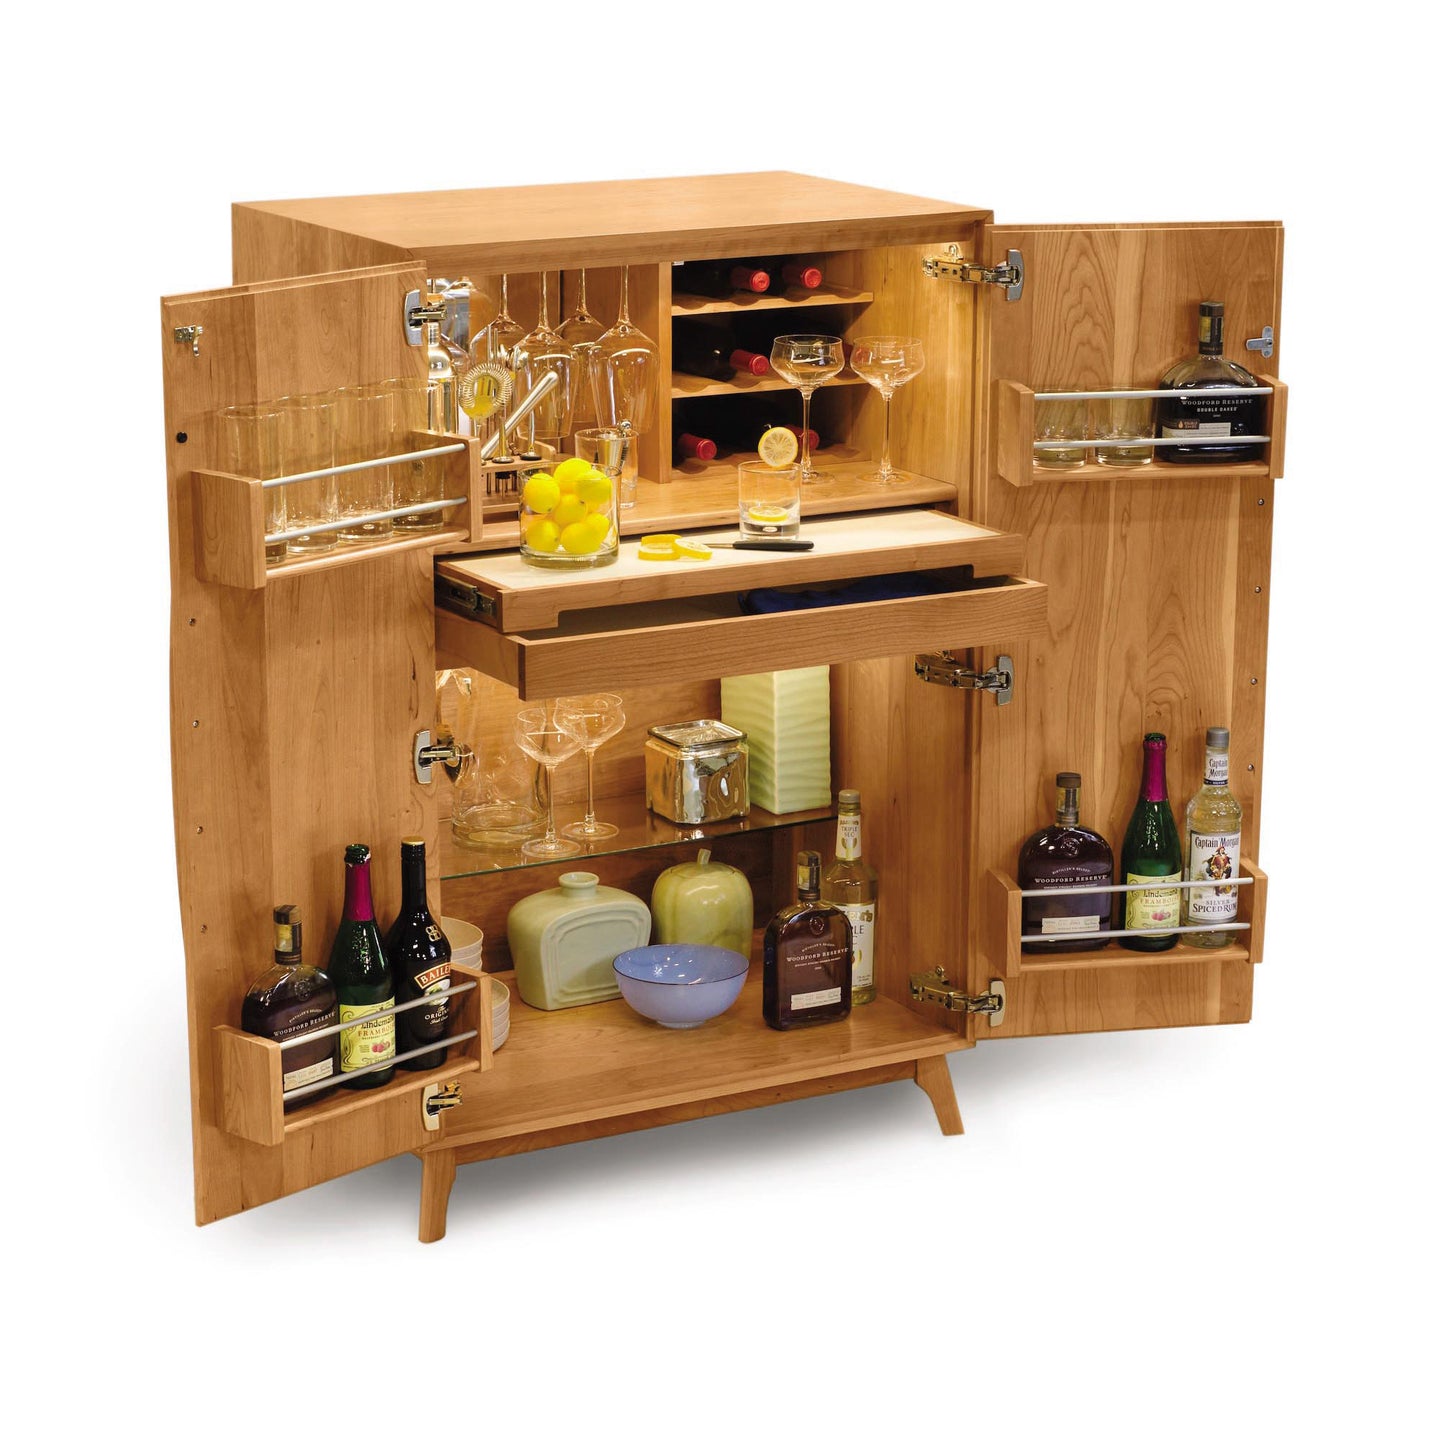 A Copeland Furniture Catalina Bar Cabinet, fully stocked with various bottles, glasses, and bar tools, with open doors revealing an assortment of alcoholic beverages and wine storage accessories.